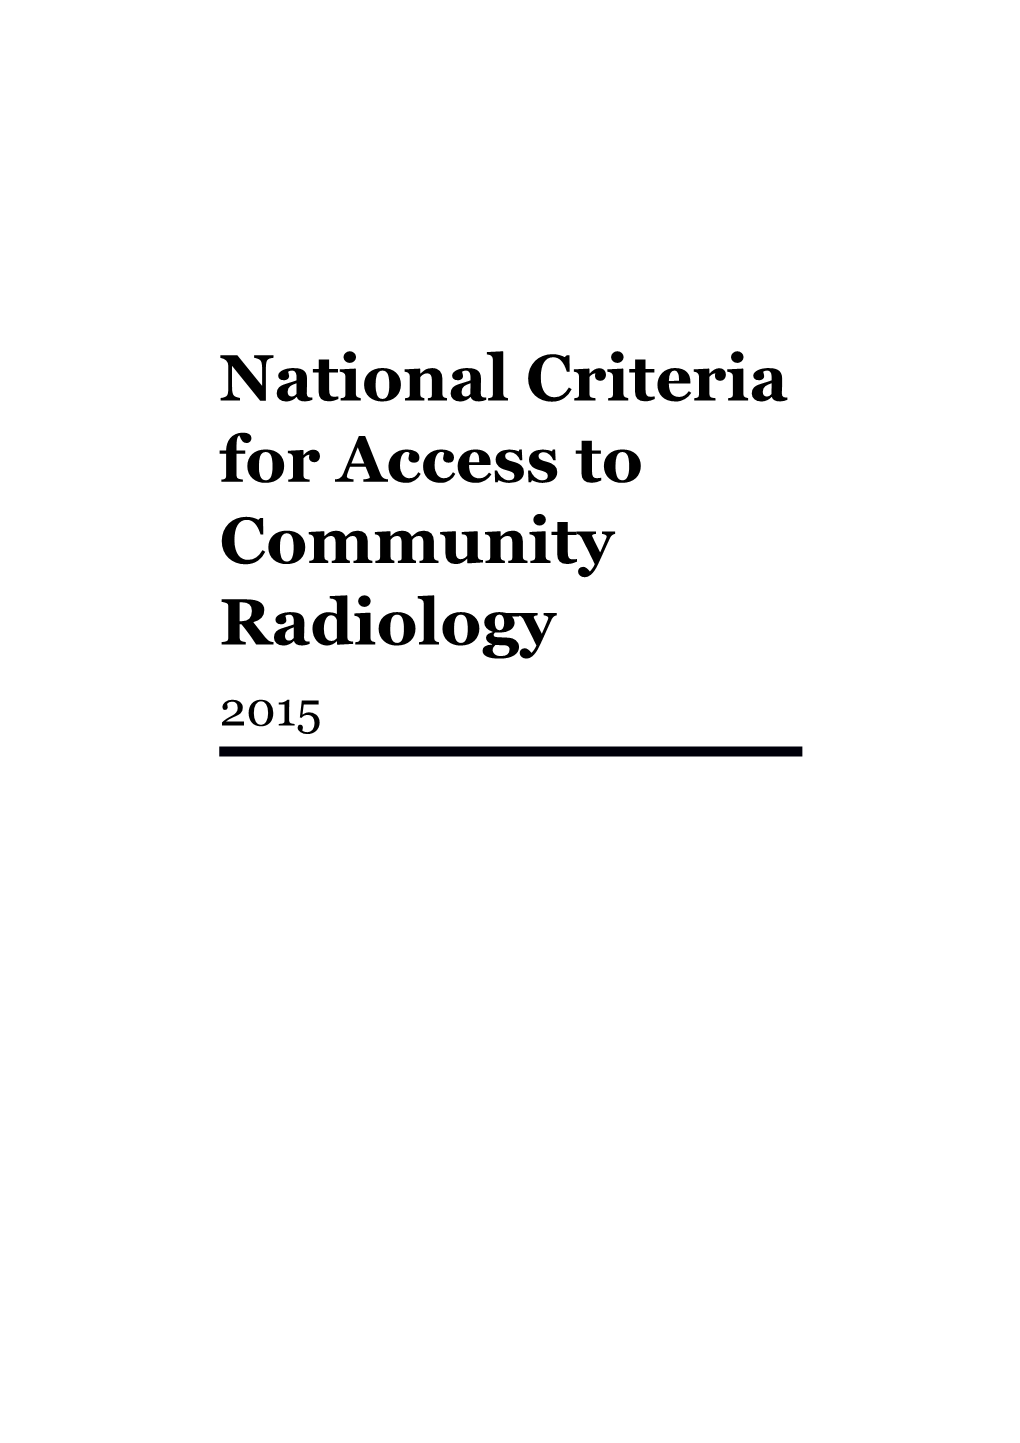 National Criteria for Access to Community Radiology